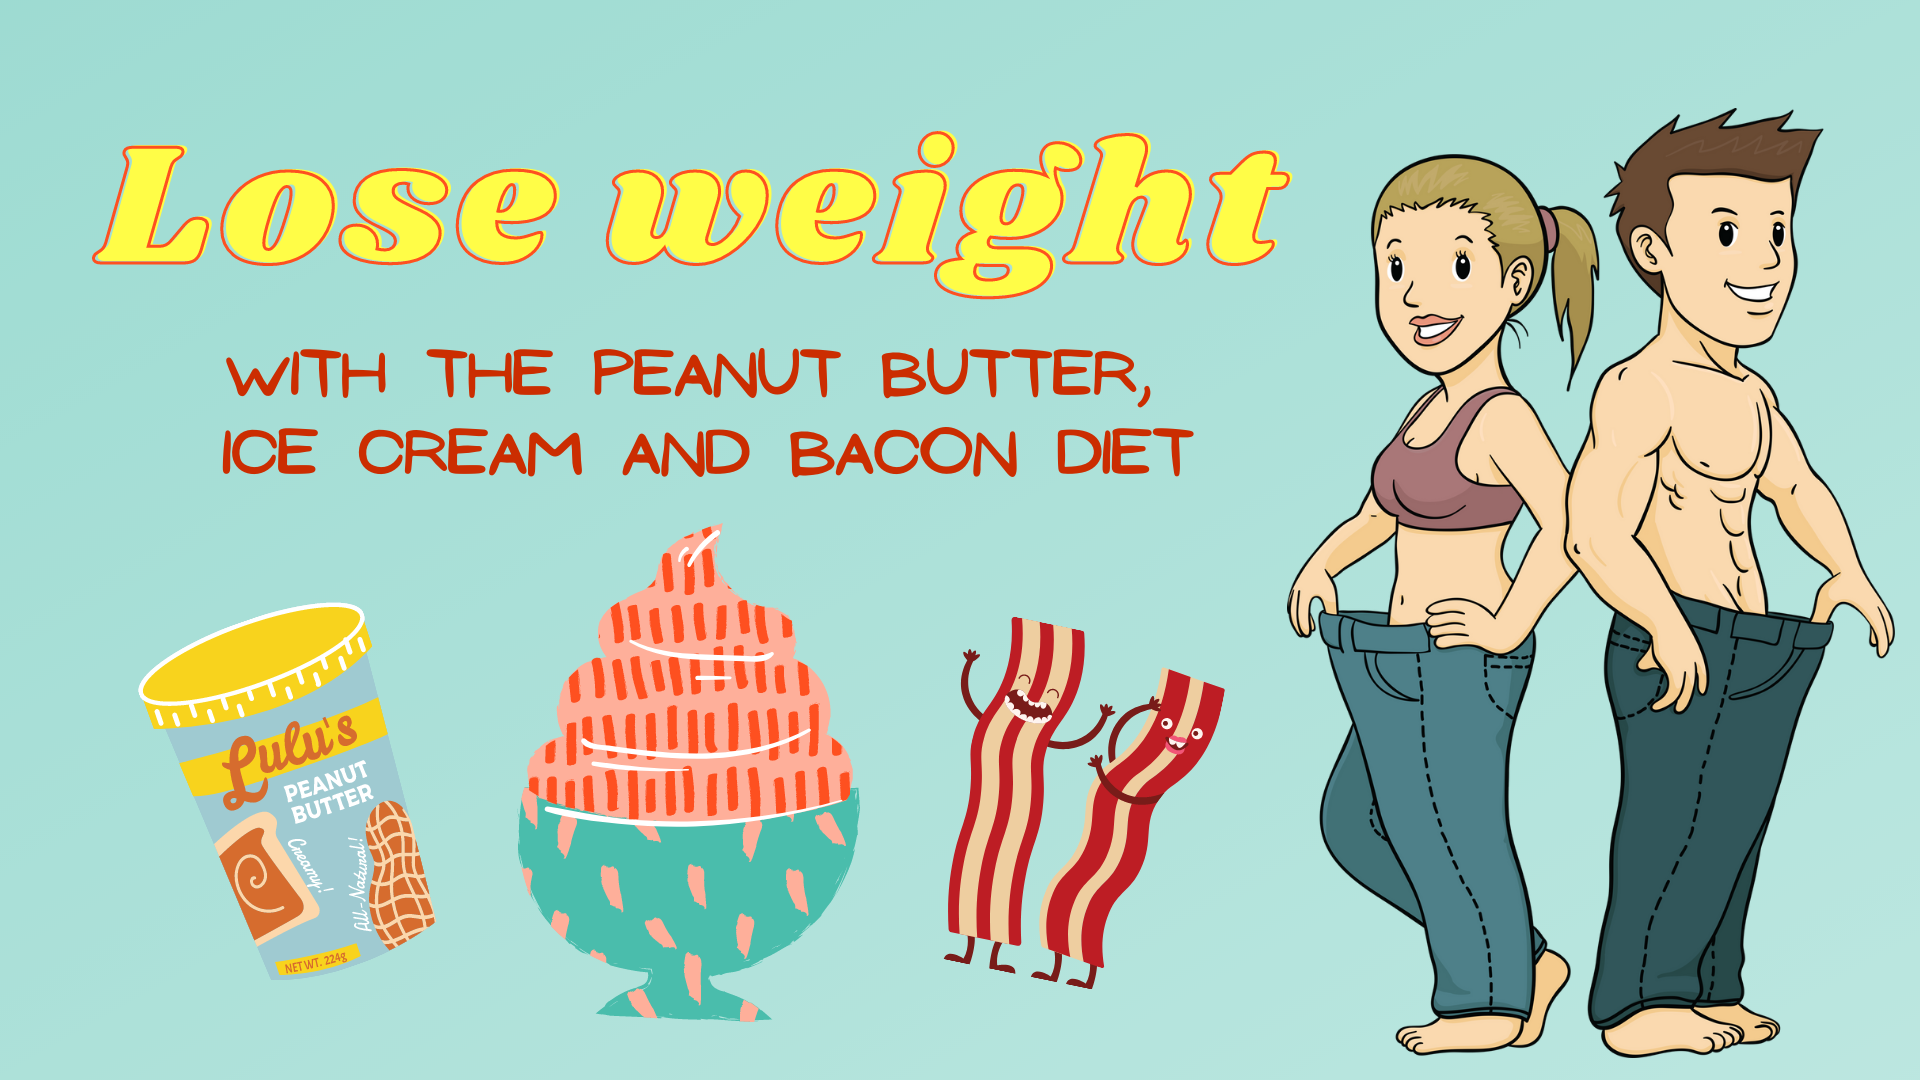 Lose weight with the peanut butter, ice cream, and bacon fad diet to learn to spot the characteristics of a fad diet